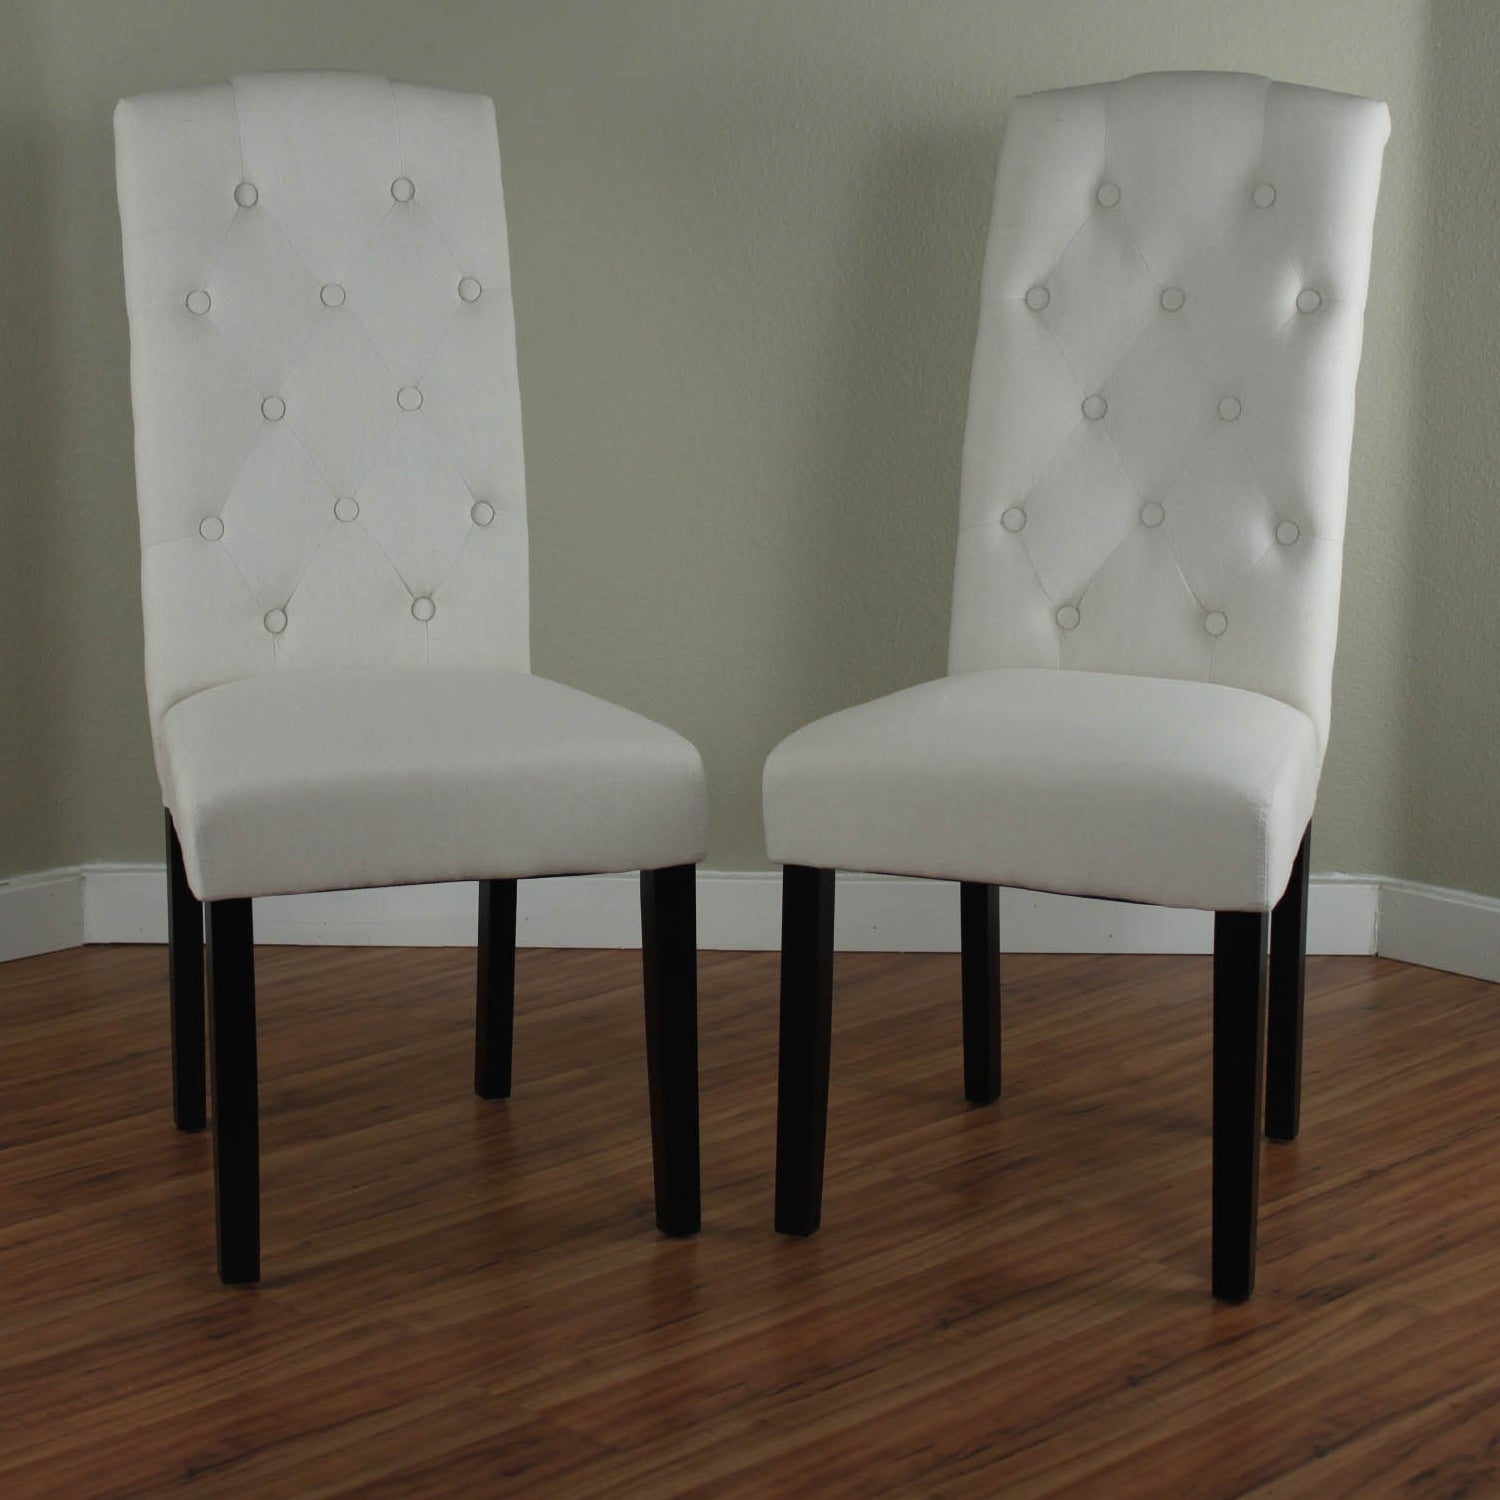 Princeton Upholstered Dining Chairs (Set of 2)